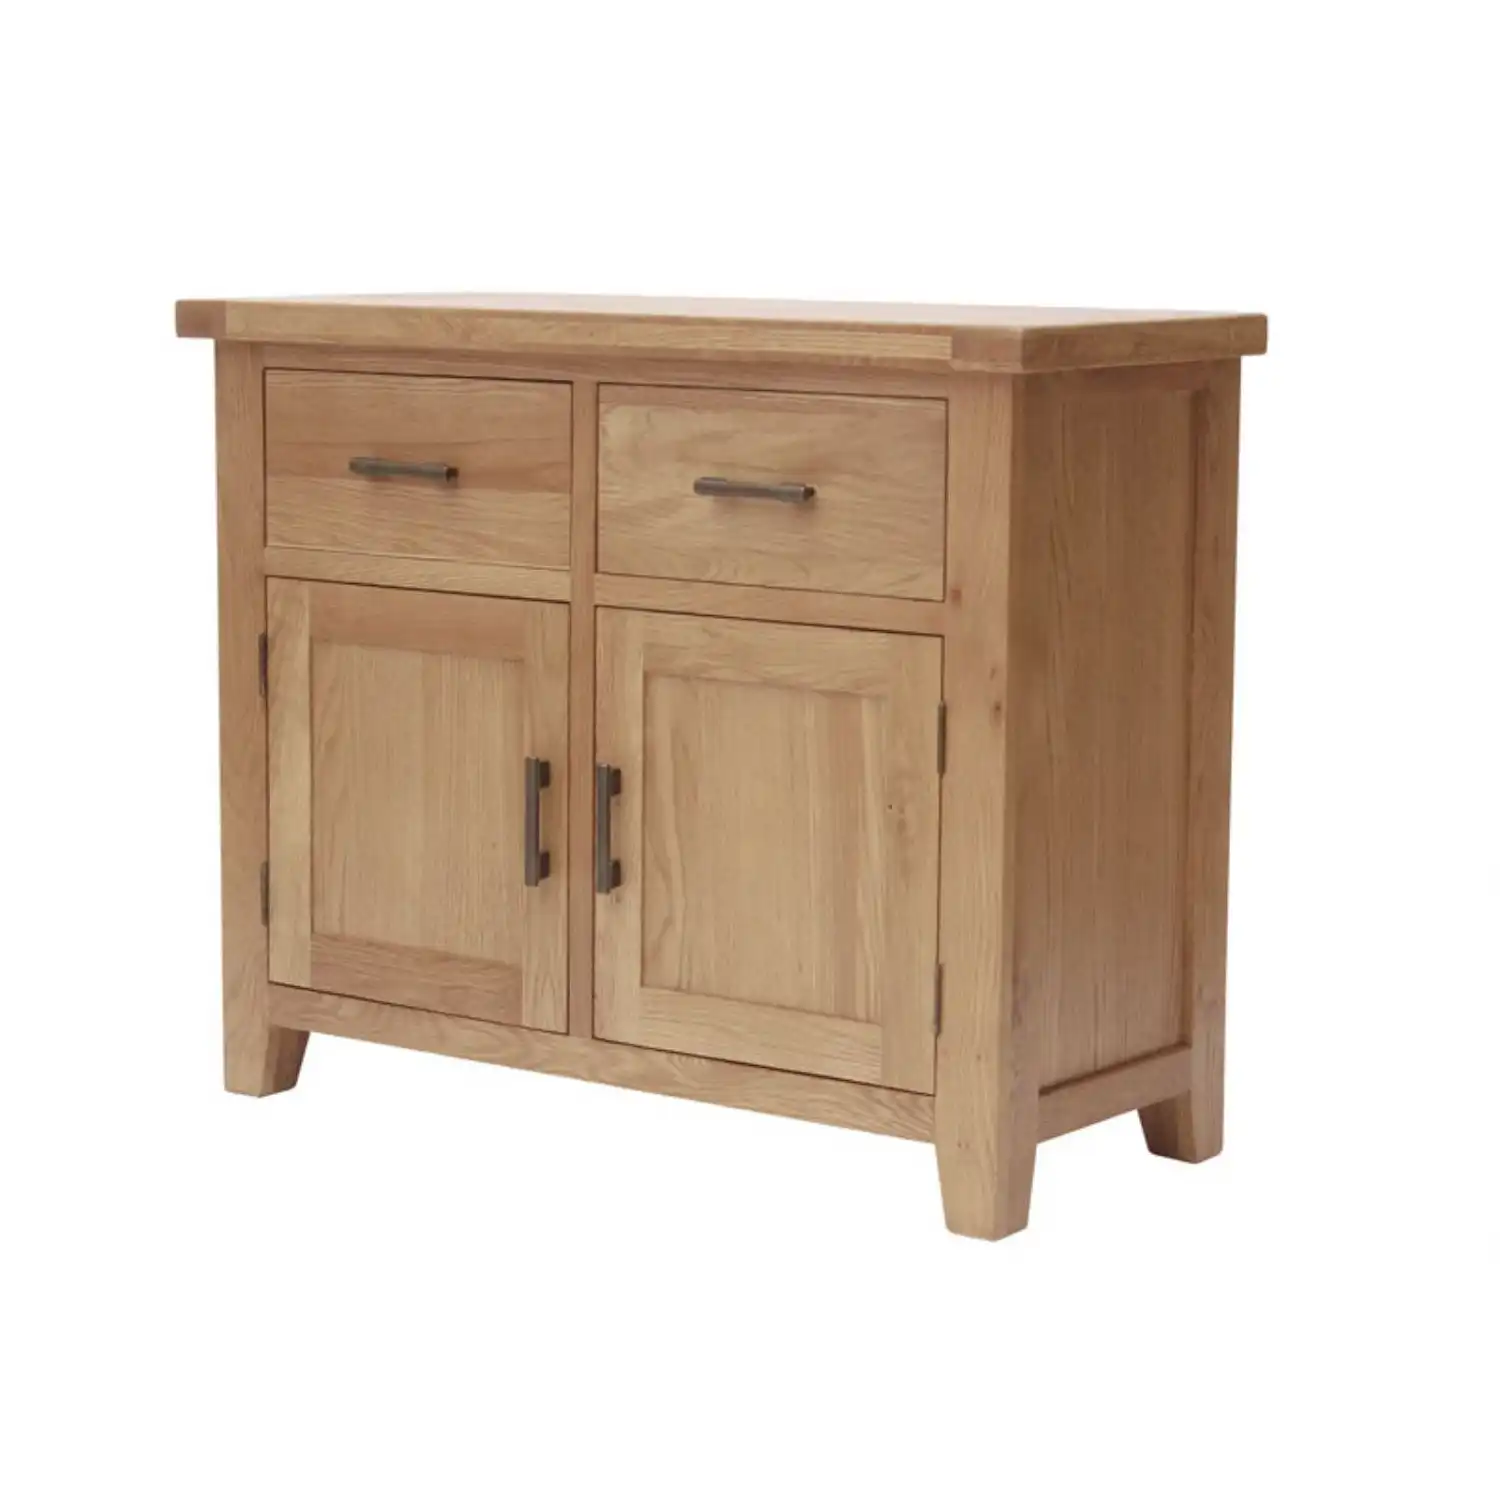 Solid Oak Small Sideboard with 2 Doors